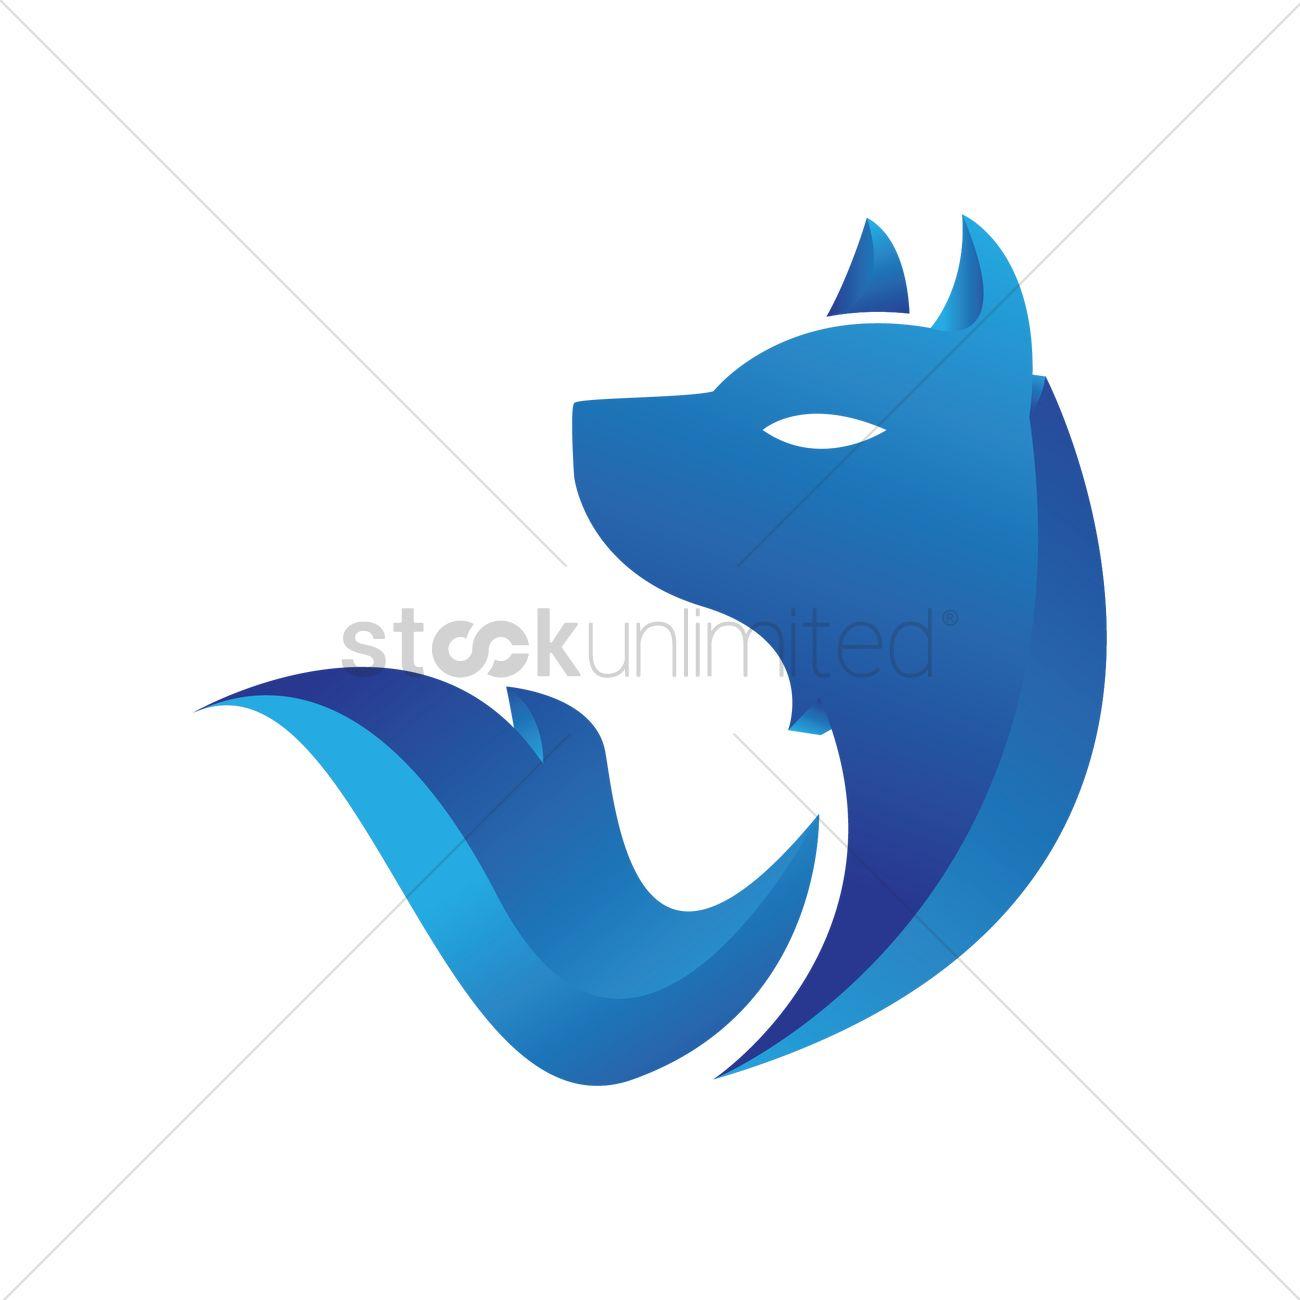 Blue Abstract Logo - Abstract logo Vector Image - 1624556 | StockUnlimited